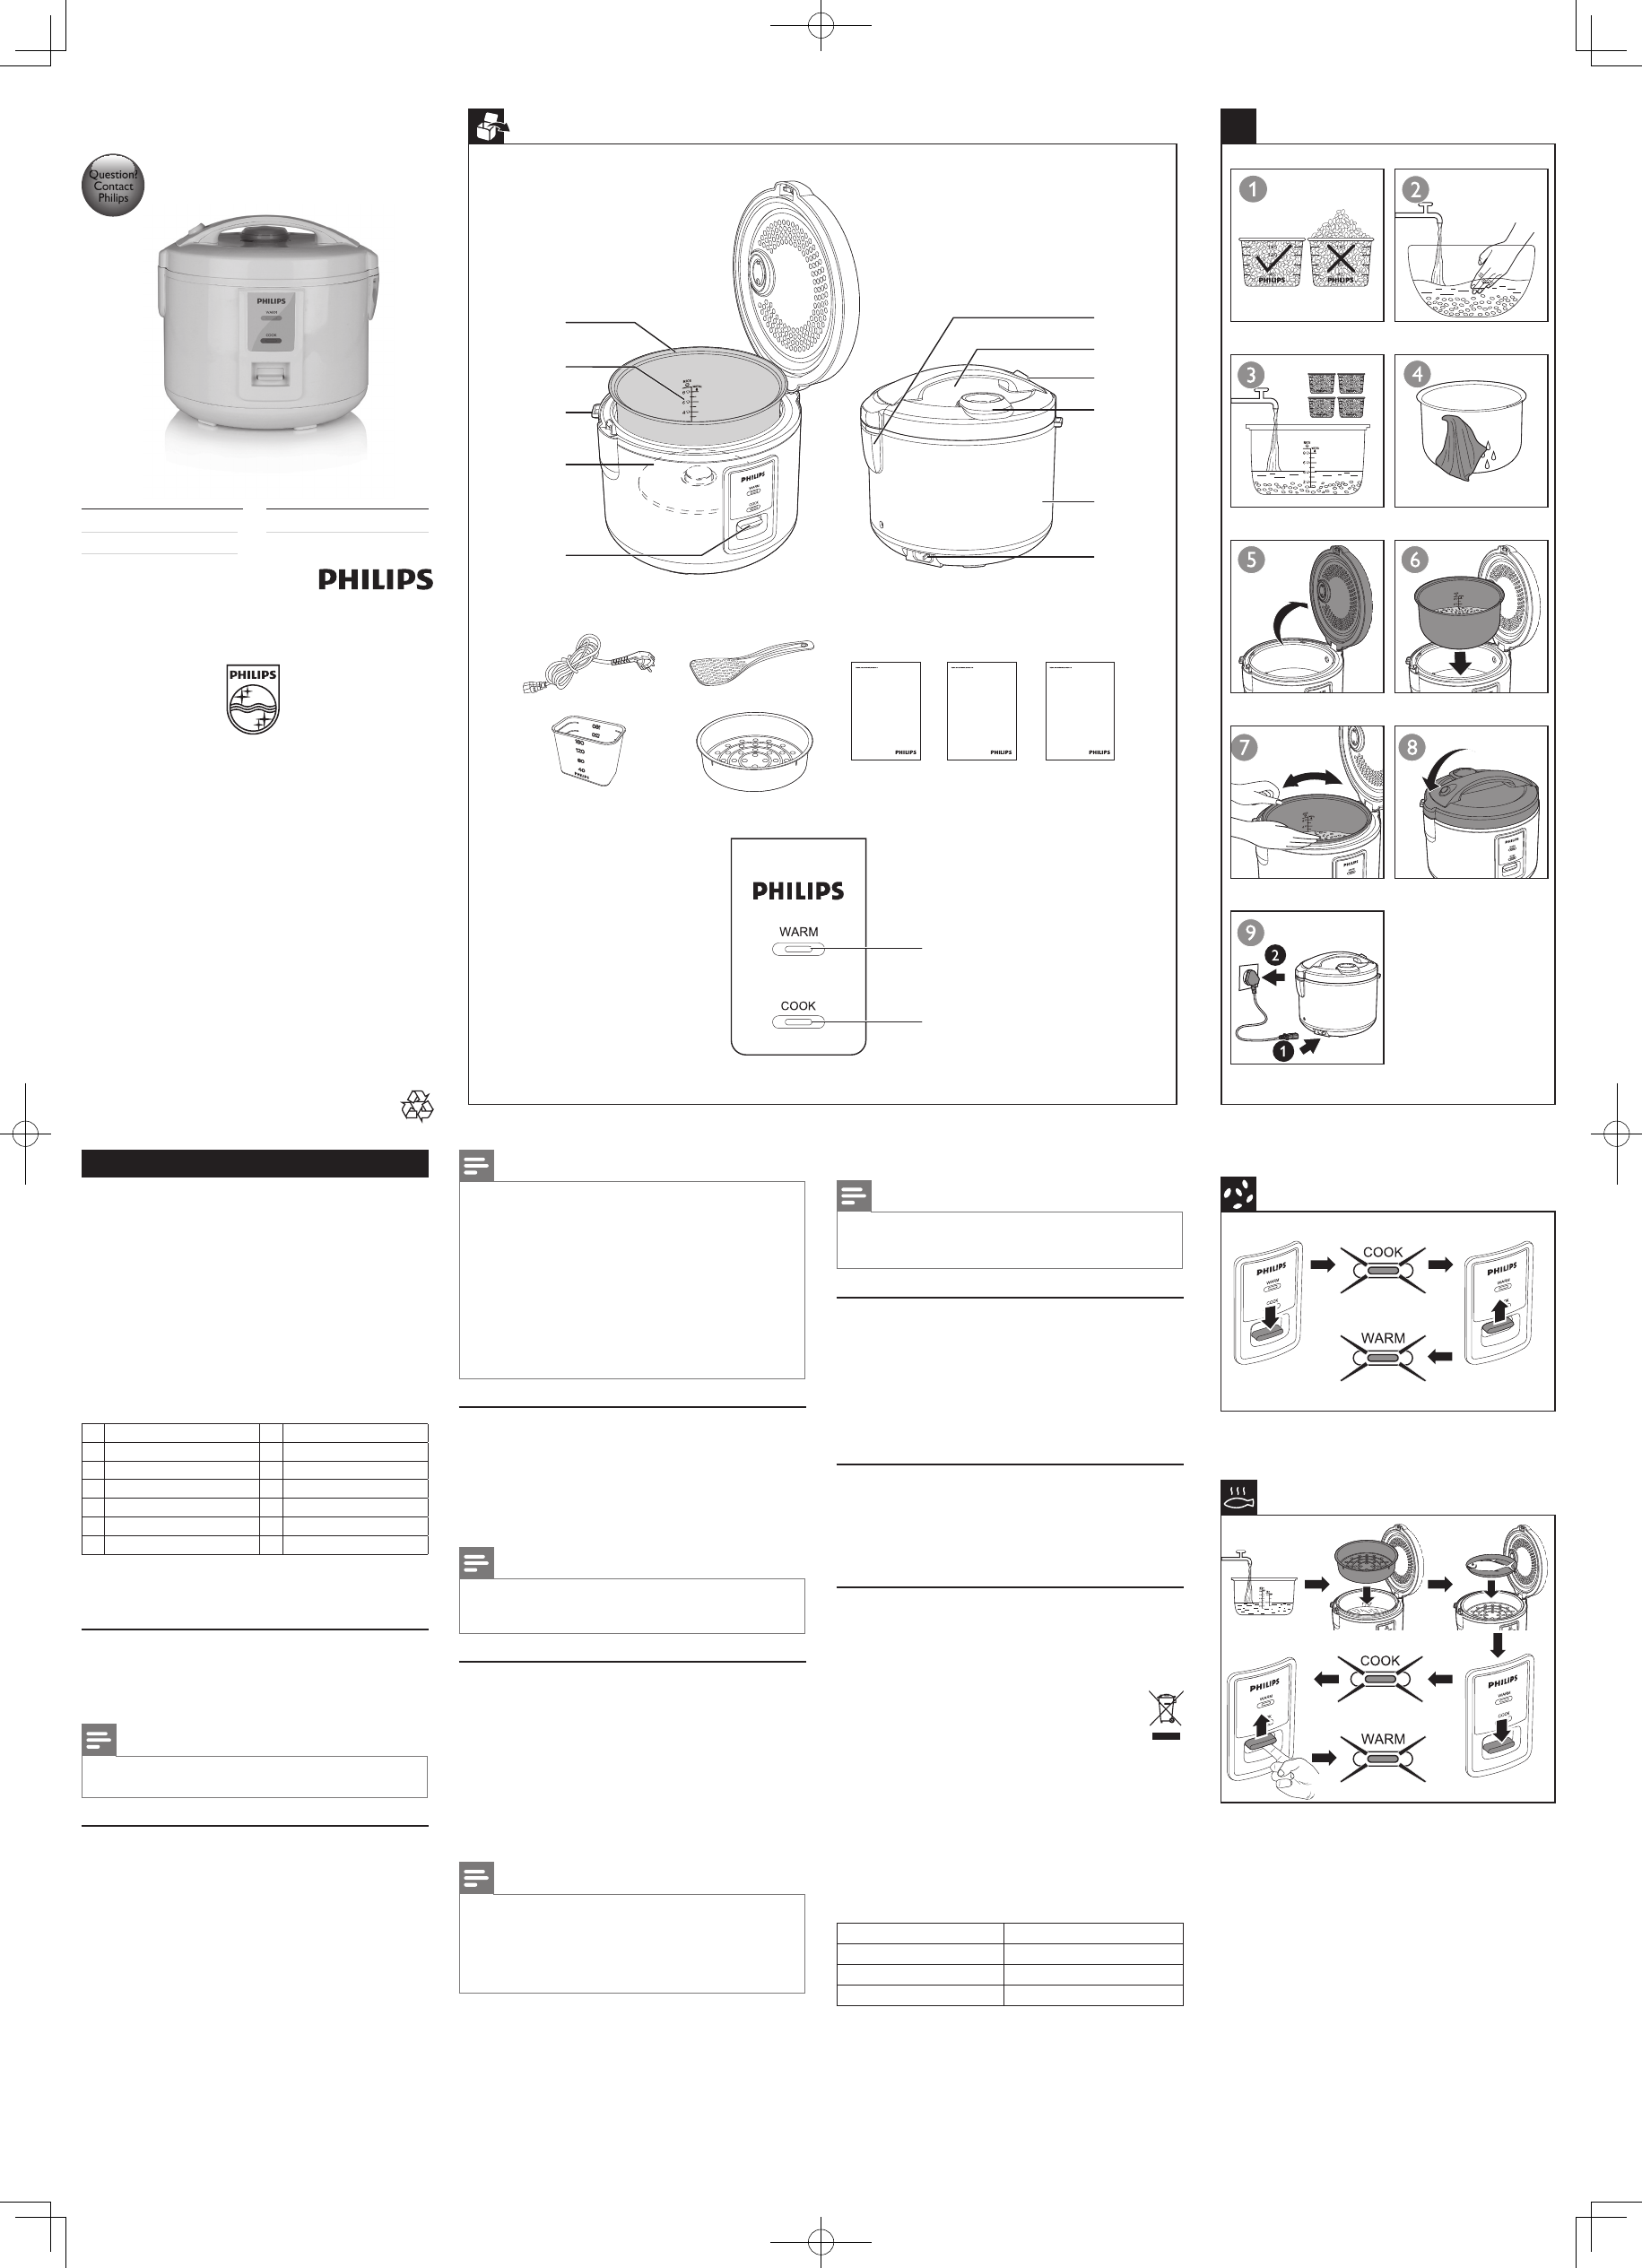 Manual Philips HD3015 (page of (English, Dutch, French)